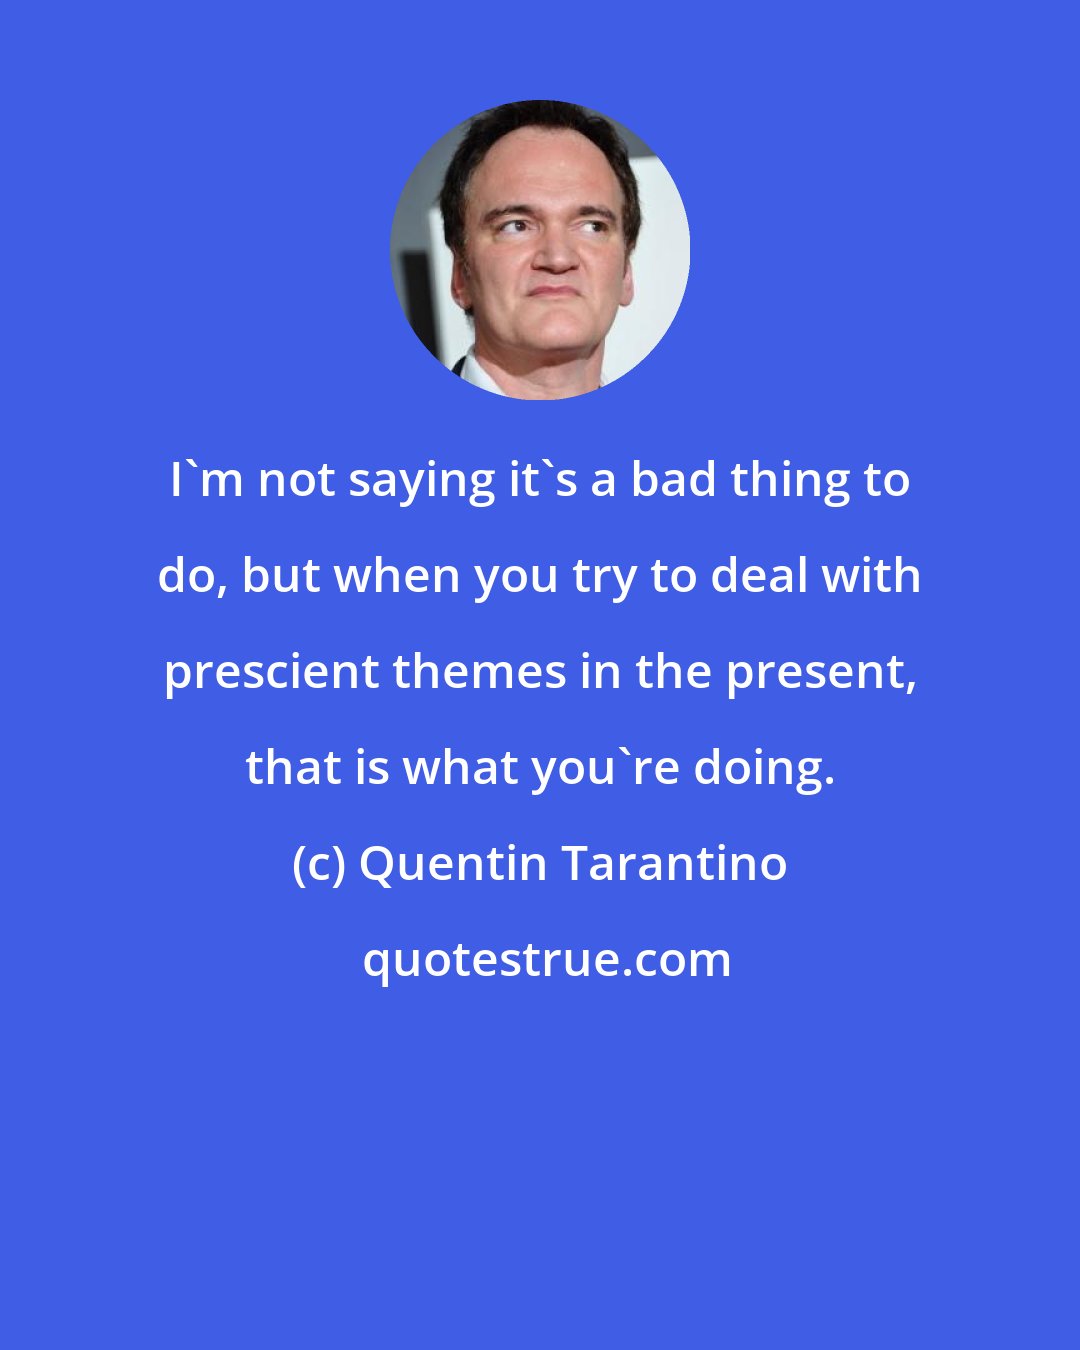 Quentin Tarantino: I'm not saying it's a bad thing to do, but when you try to deal with prescient themes in the present, that is what you're doing.